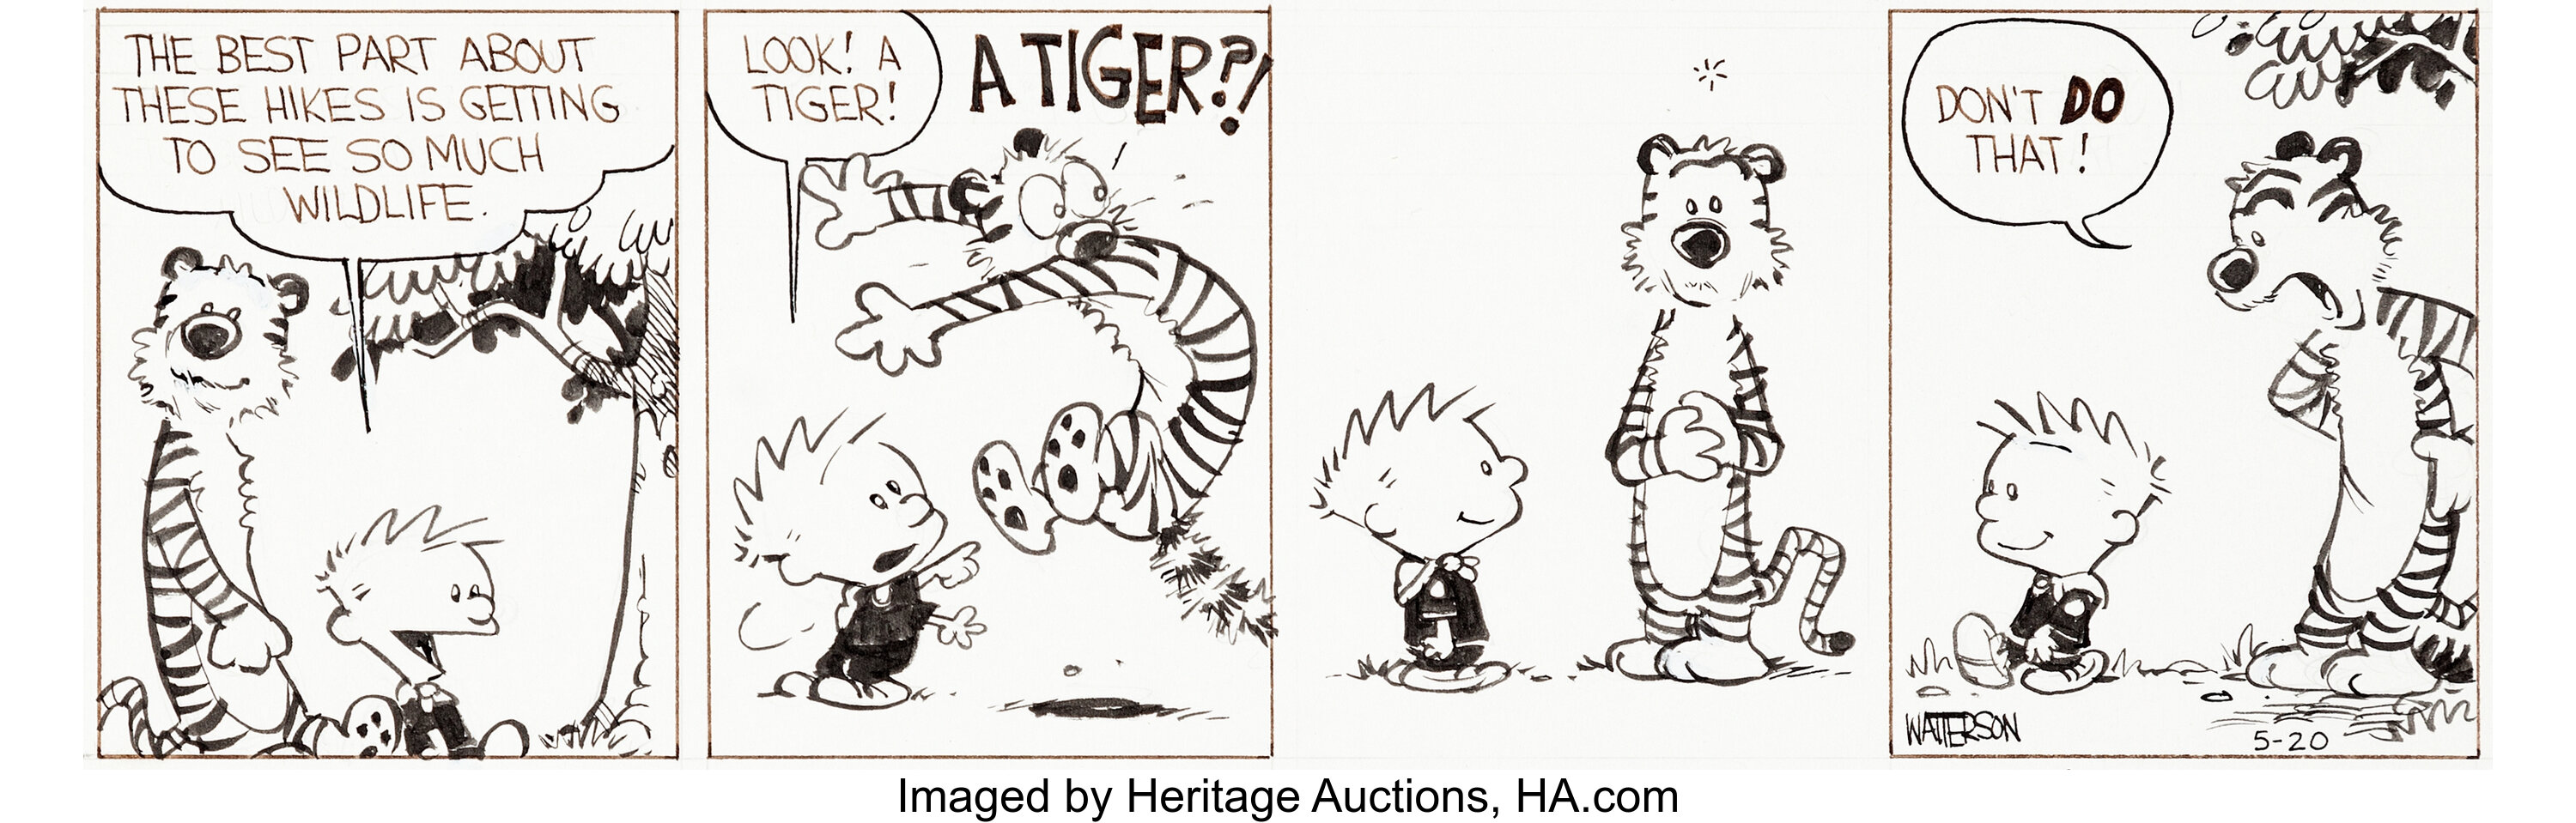 Bill Watterson Calvin and Hobbes Daily Comic Strip Original Art | Lot  #92265 | Heritage Auctions